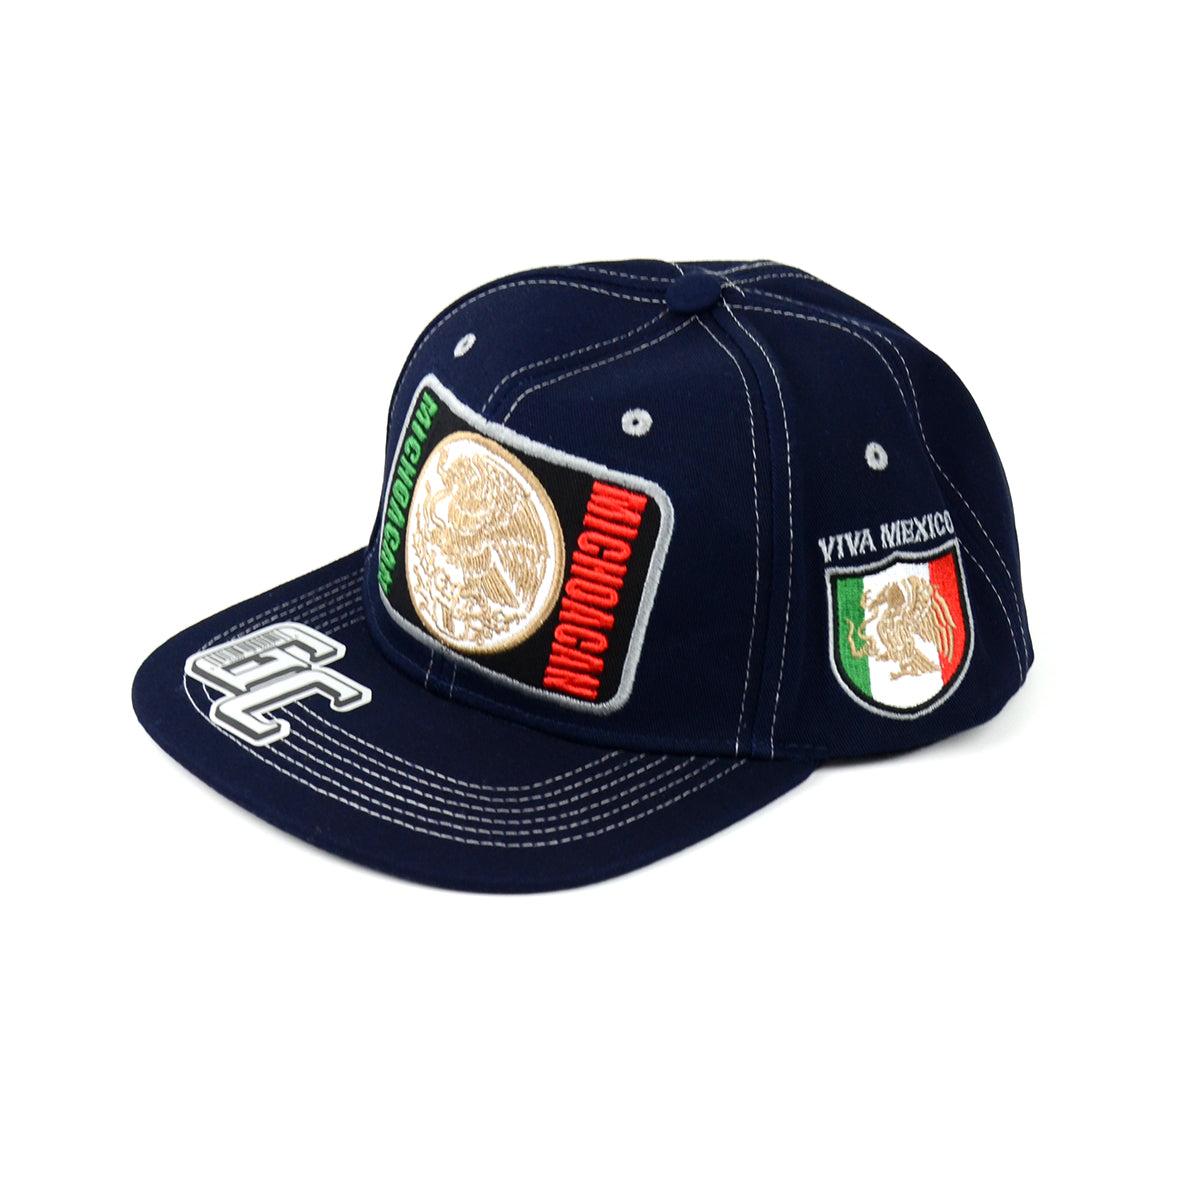 Snapback VIVA MEXICO HAT Embroidered